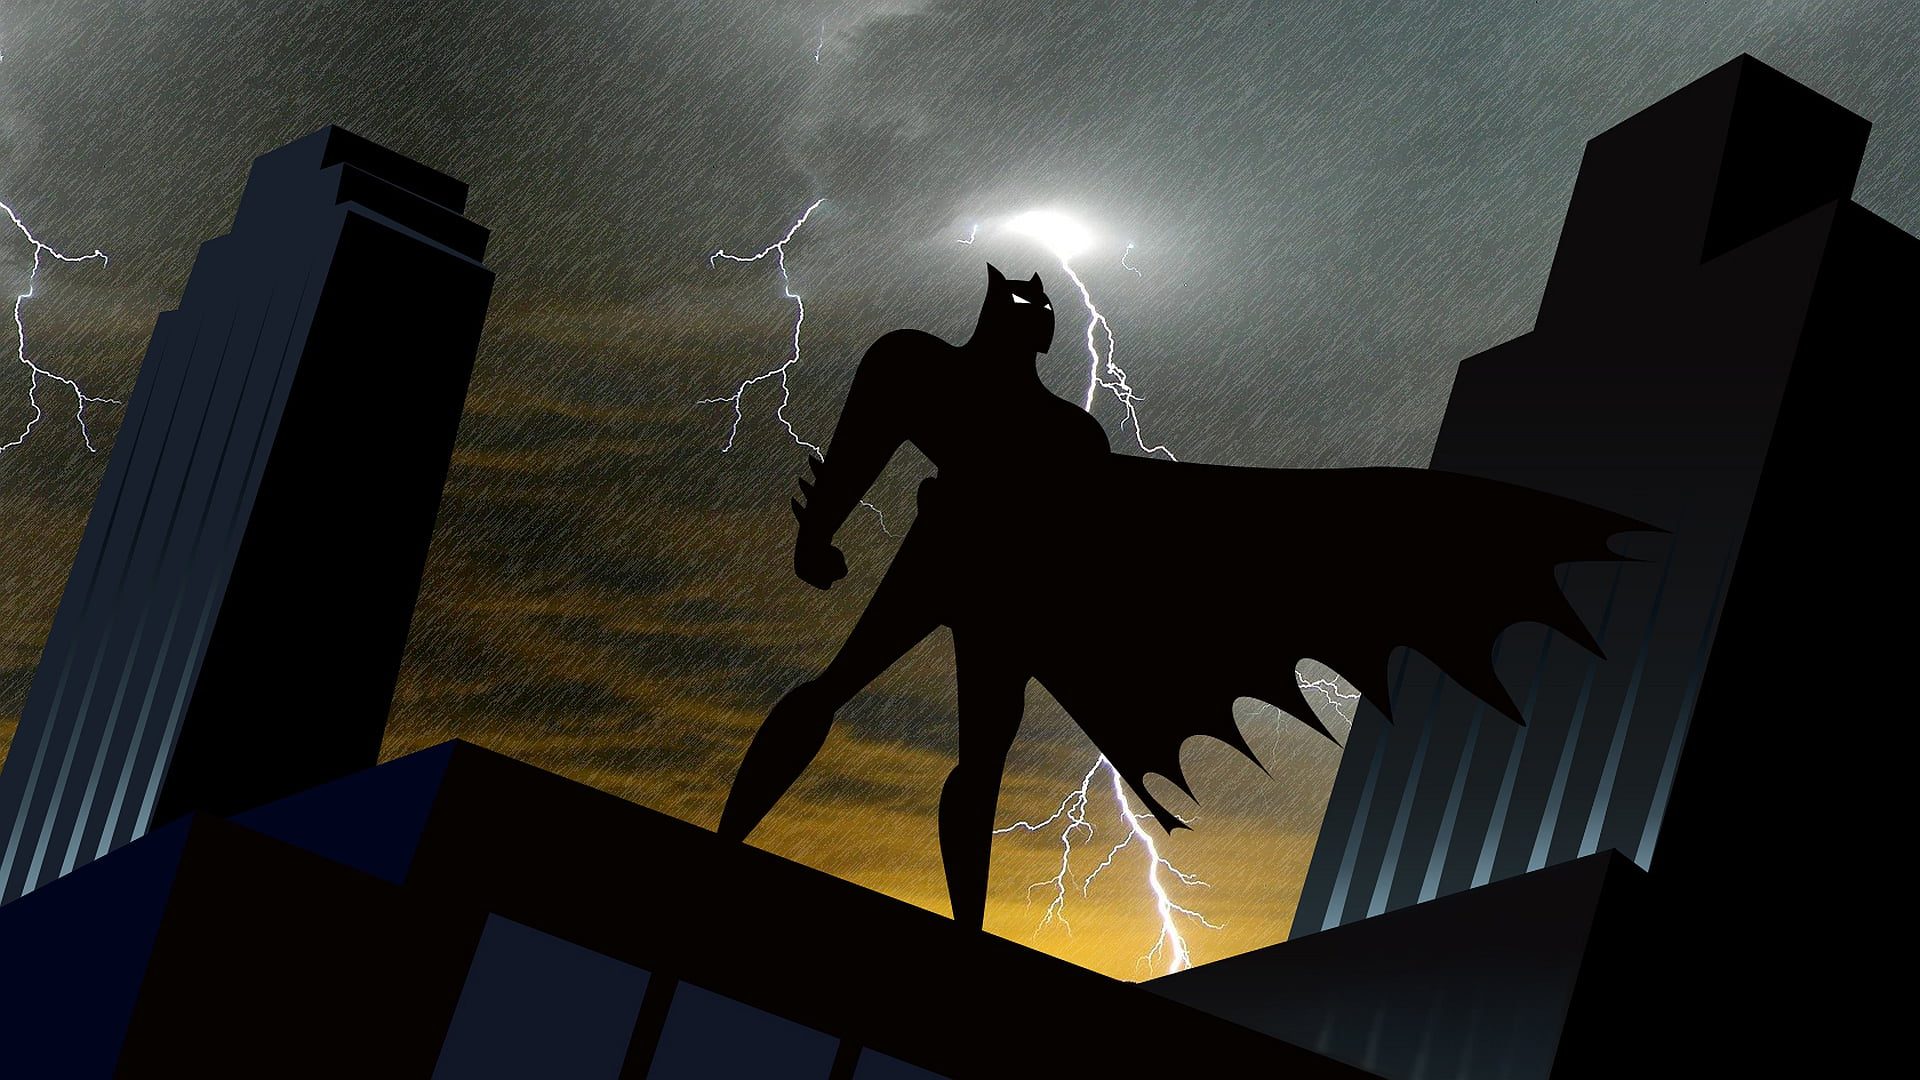 Animated Batman silhouette with lightning